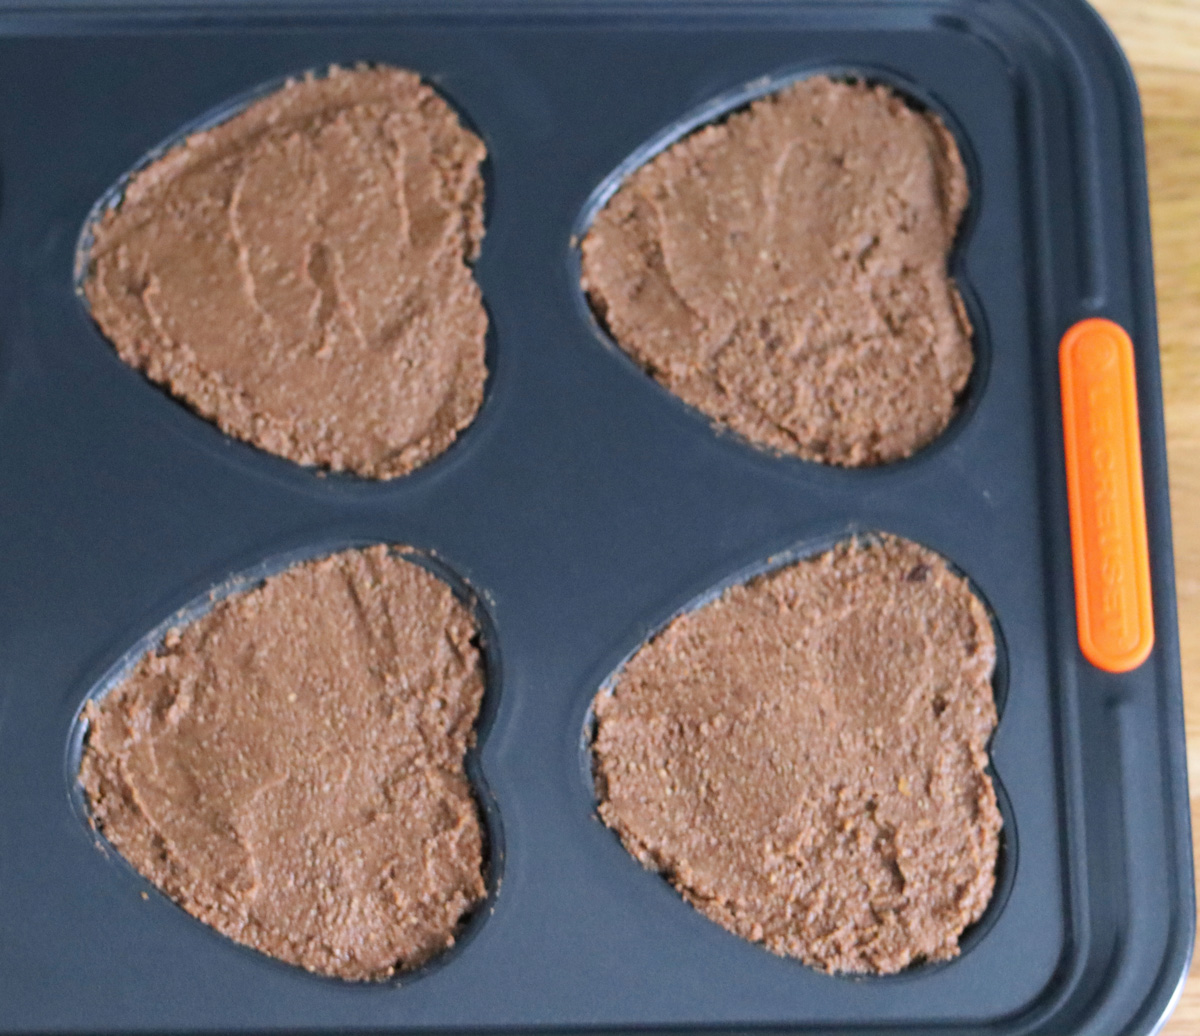 the cake batter in a heart shaped muffin pan